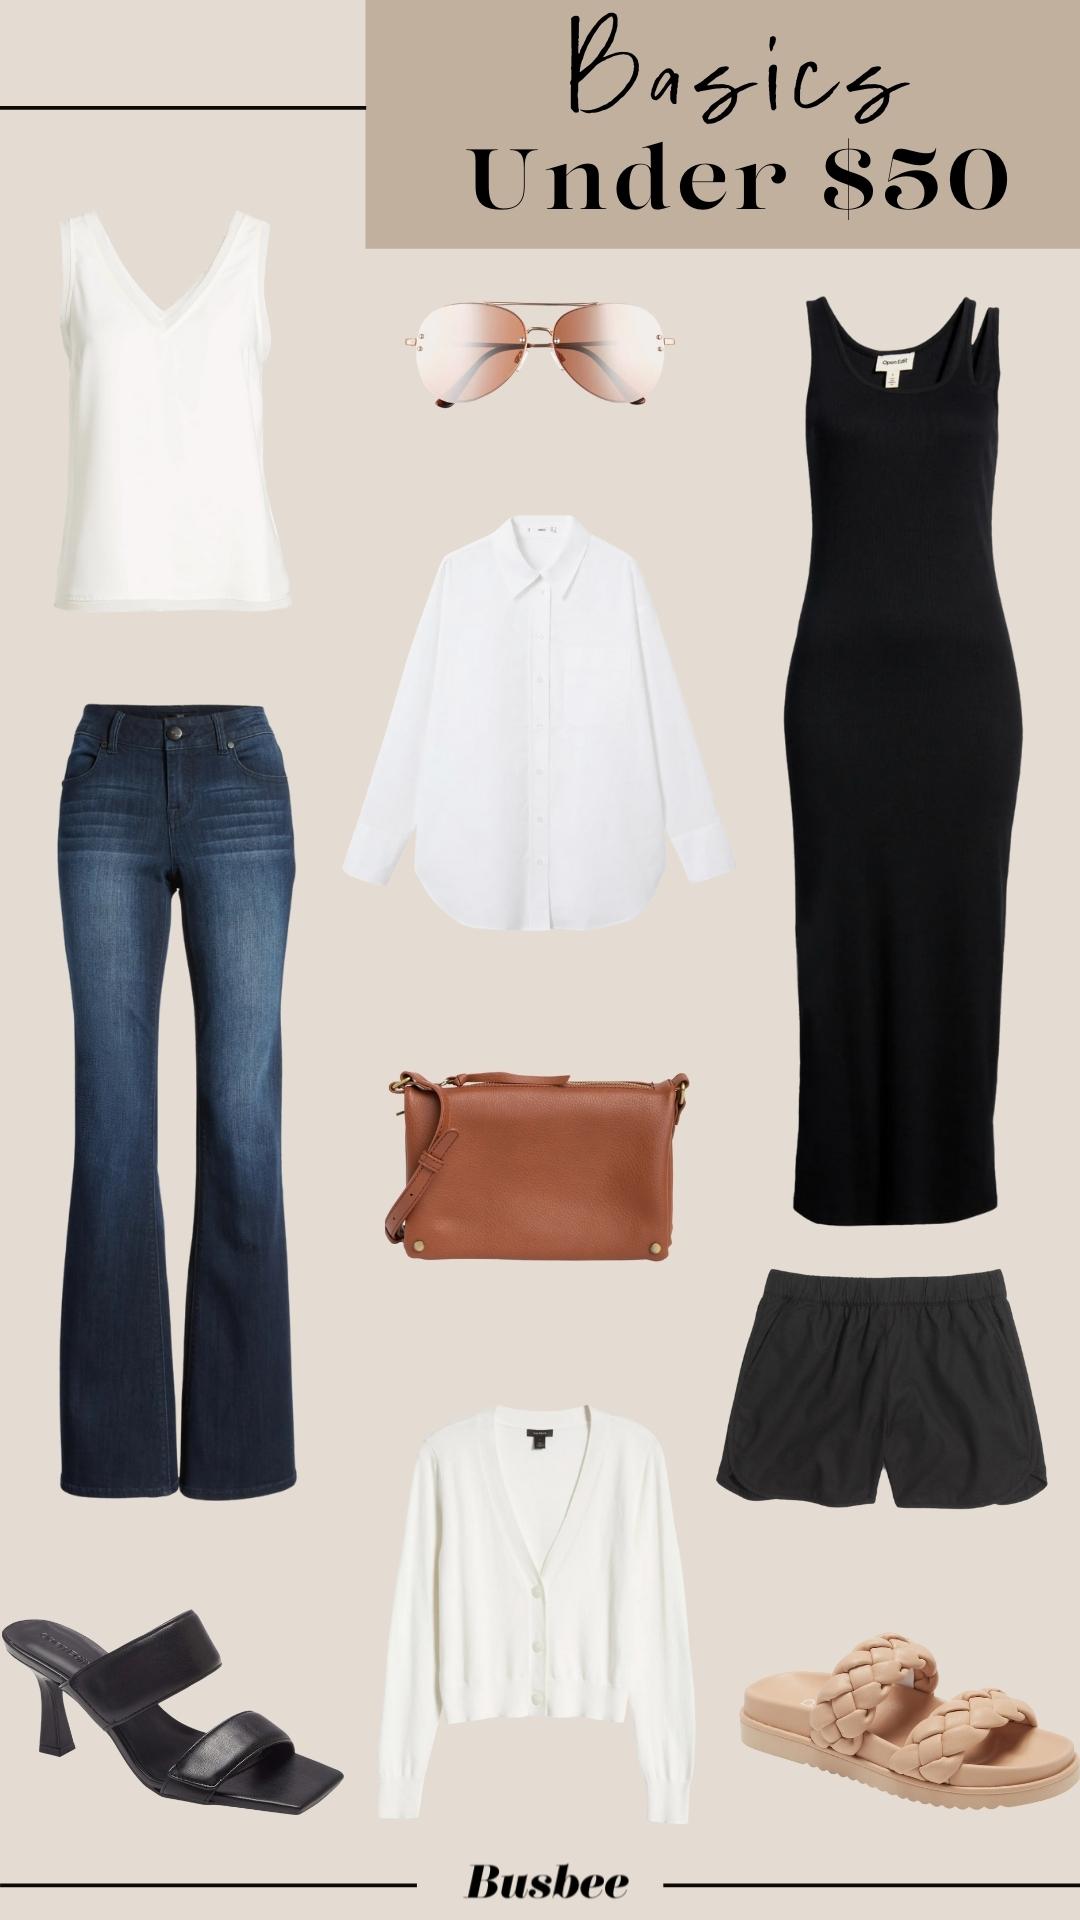 affordable basics, basics on a budget, how to build a wardrobe on a budget, wardrobe basics on a budget, wardrobe basics checklist, affordable wardrobe basics, erin busbee, busbee style, wardrobe basics under $50